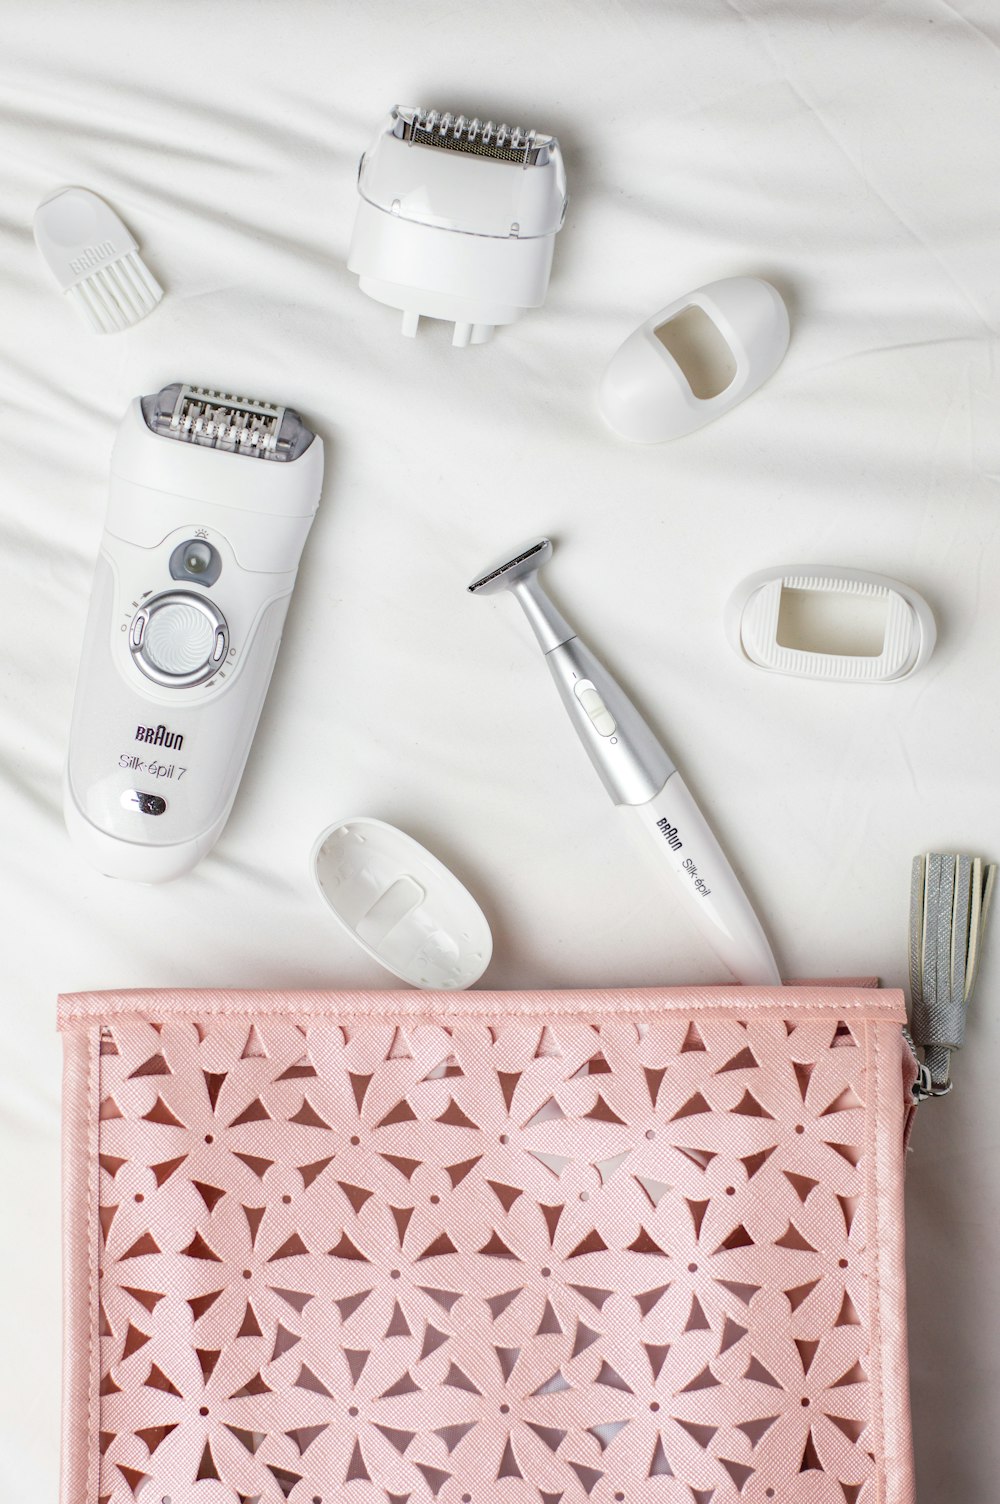 epilator and shaver on white cloth